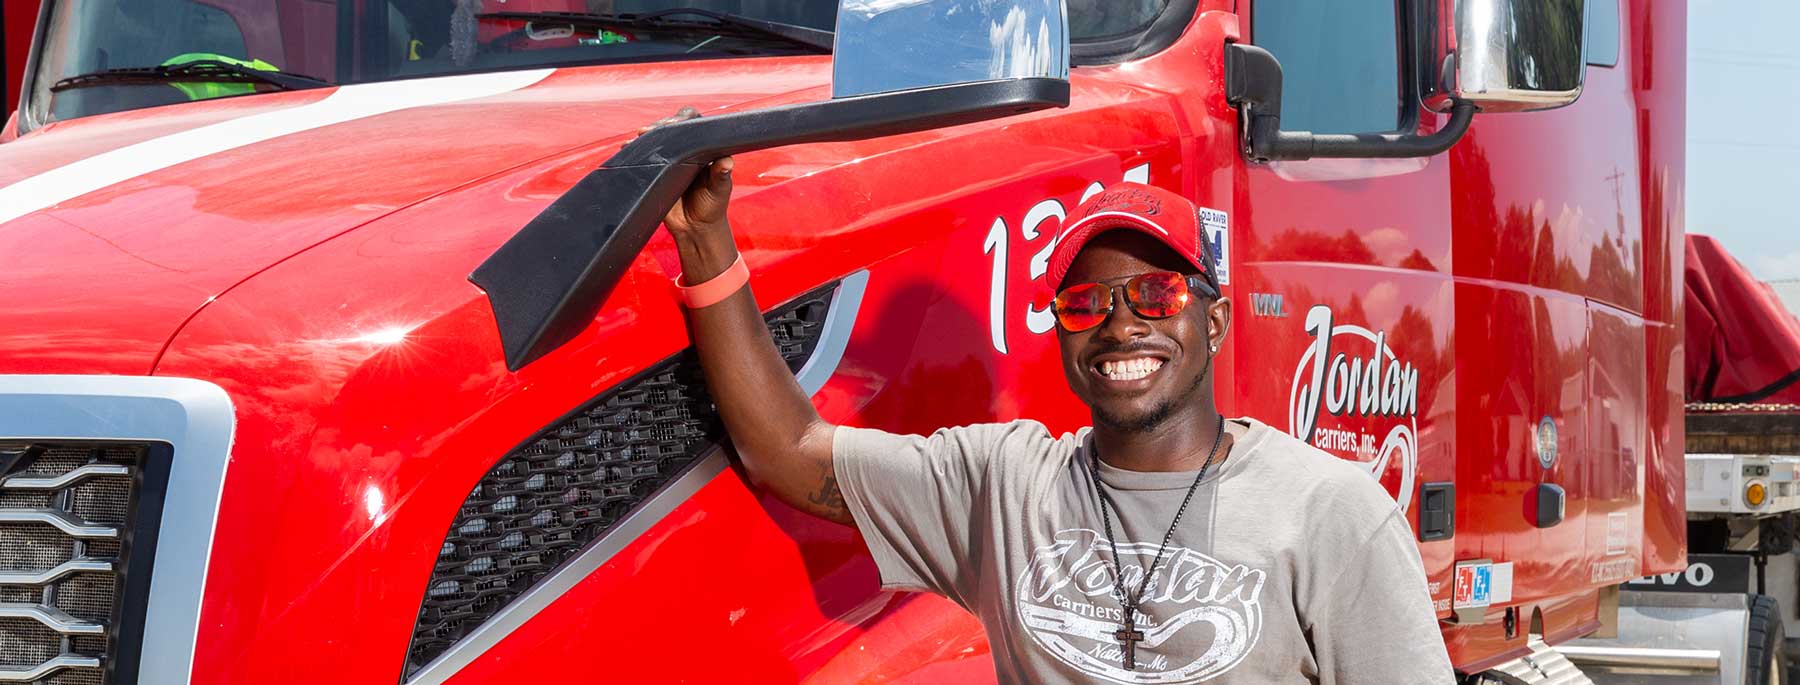 Guy standing beside a red truck with sunglasses on